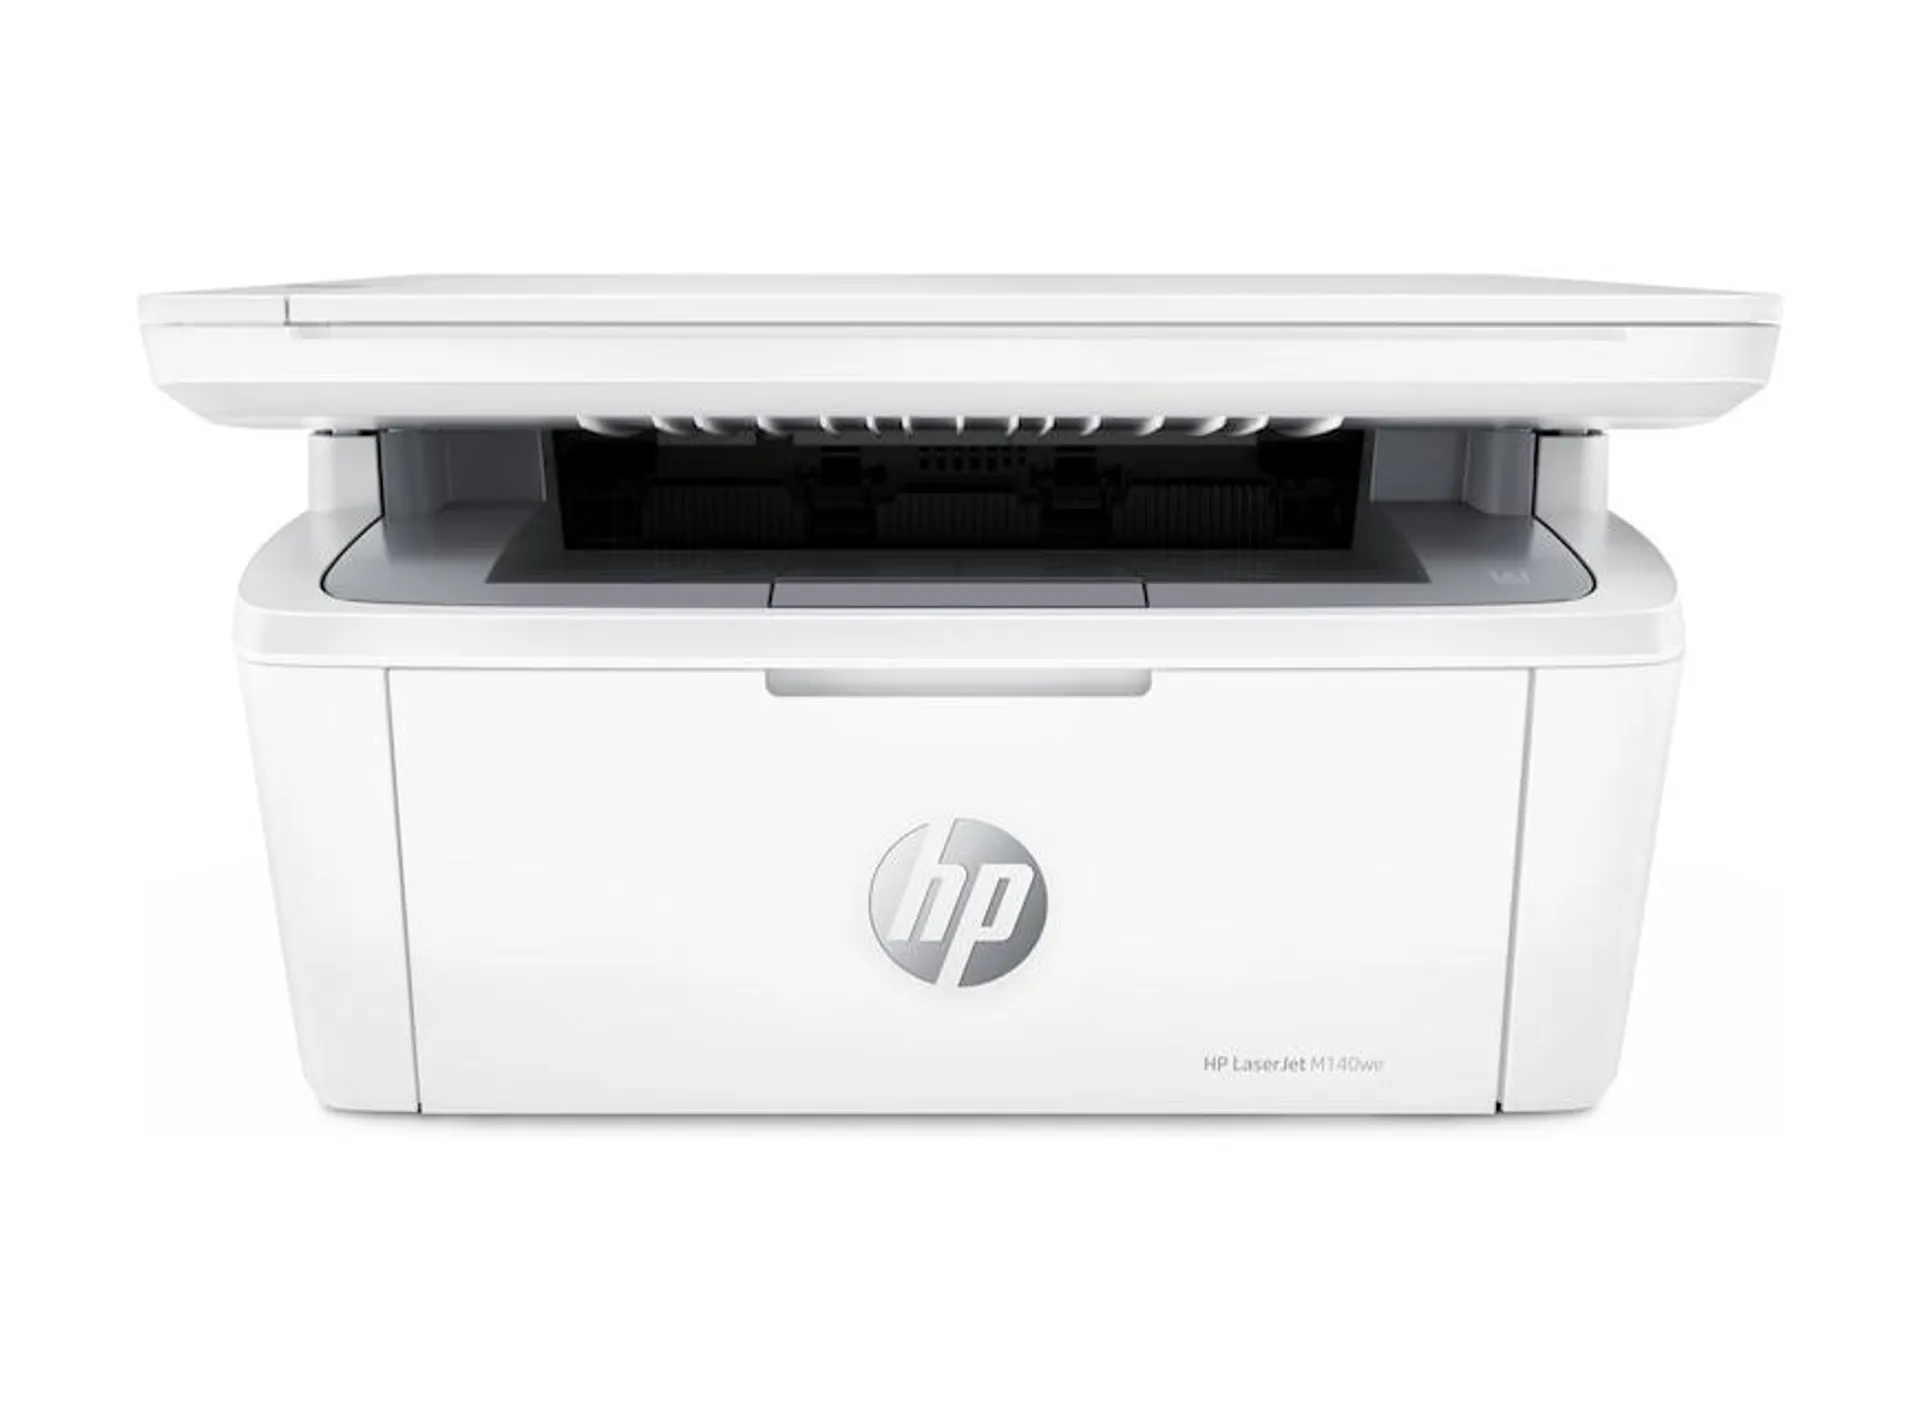 HP LaserJet M140we HP+ Wireless Printer with 6 months Instant Ink